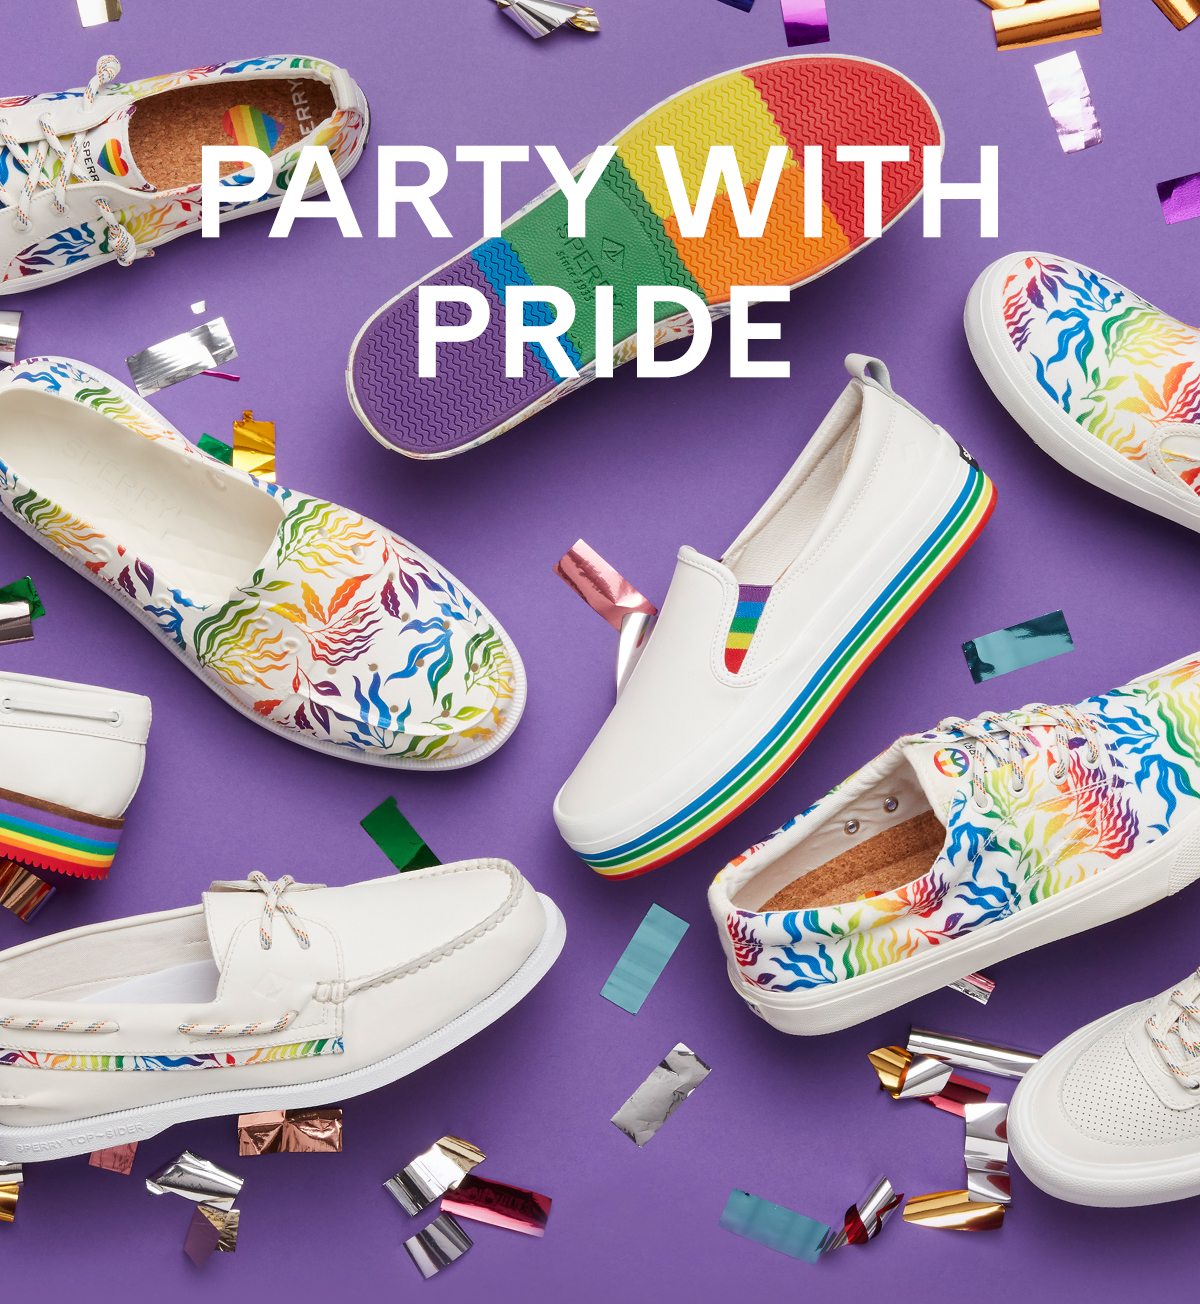 PARTY WITH PRIDE